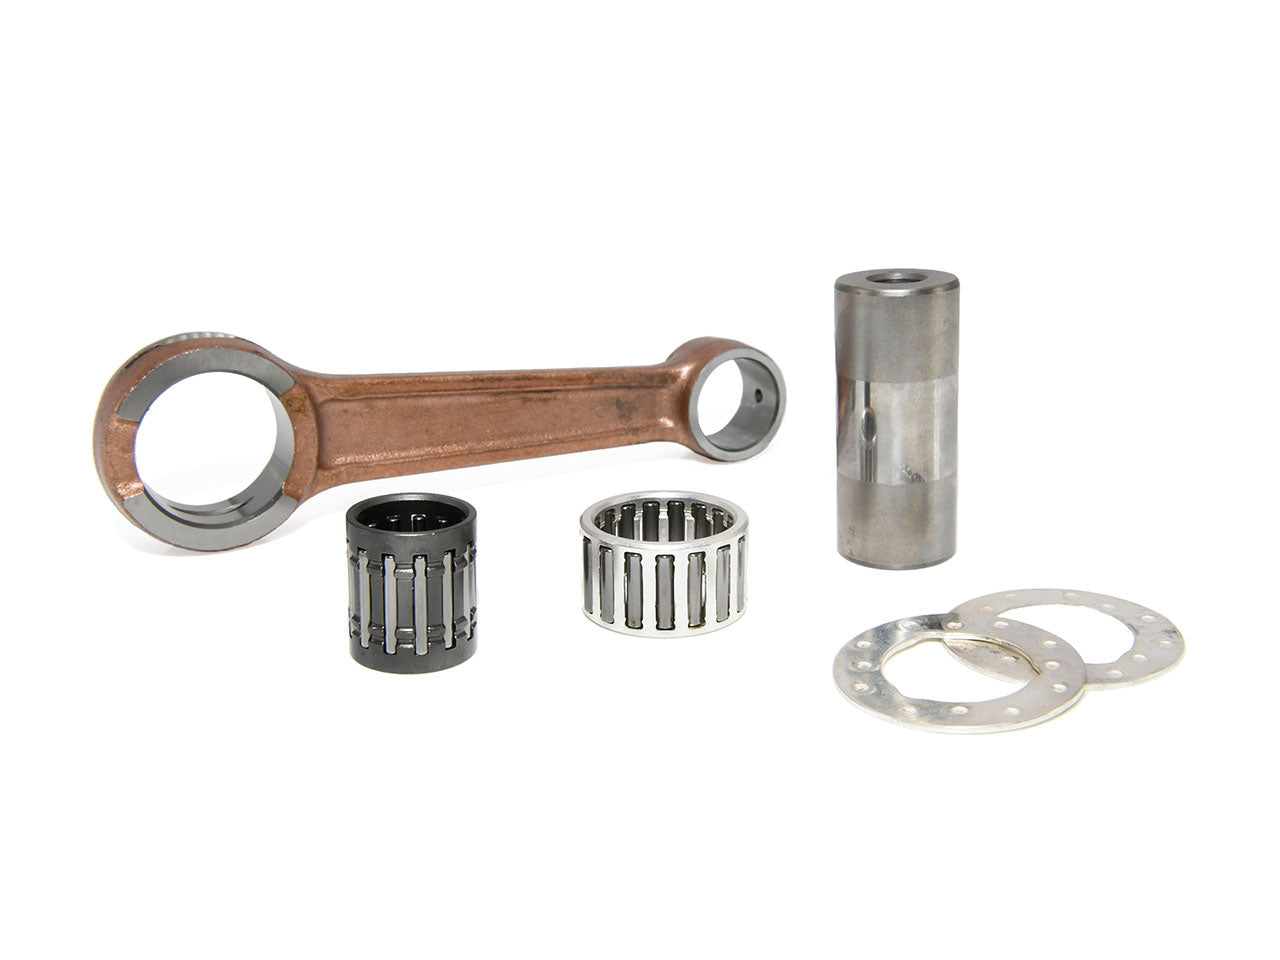 Order original Barikit moped connecting rods, connecting rods and